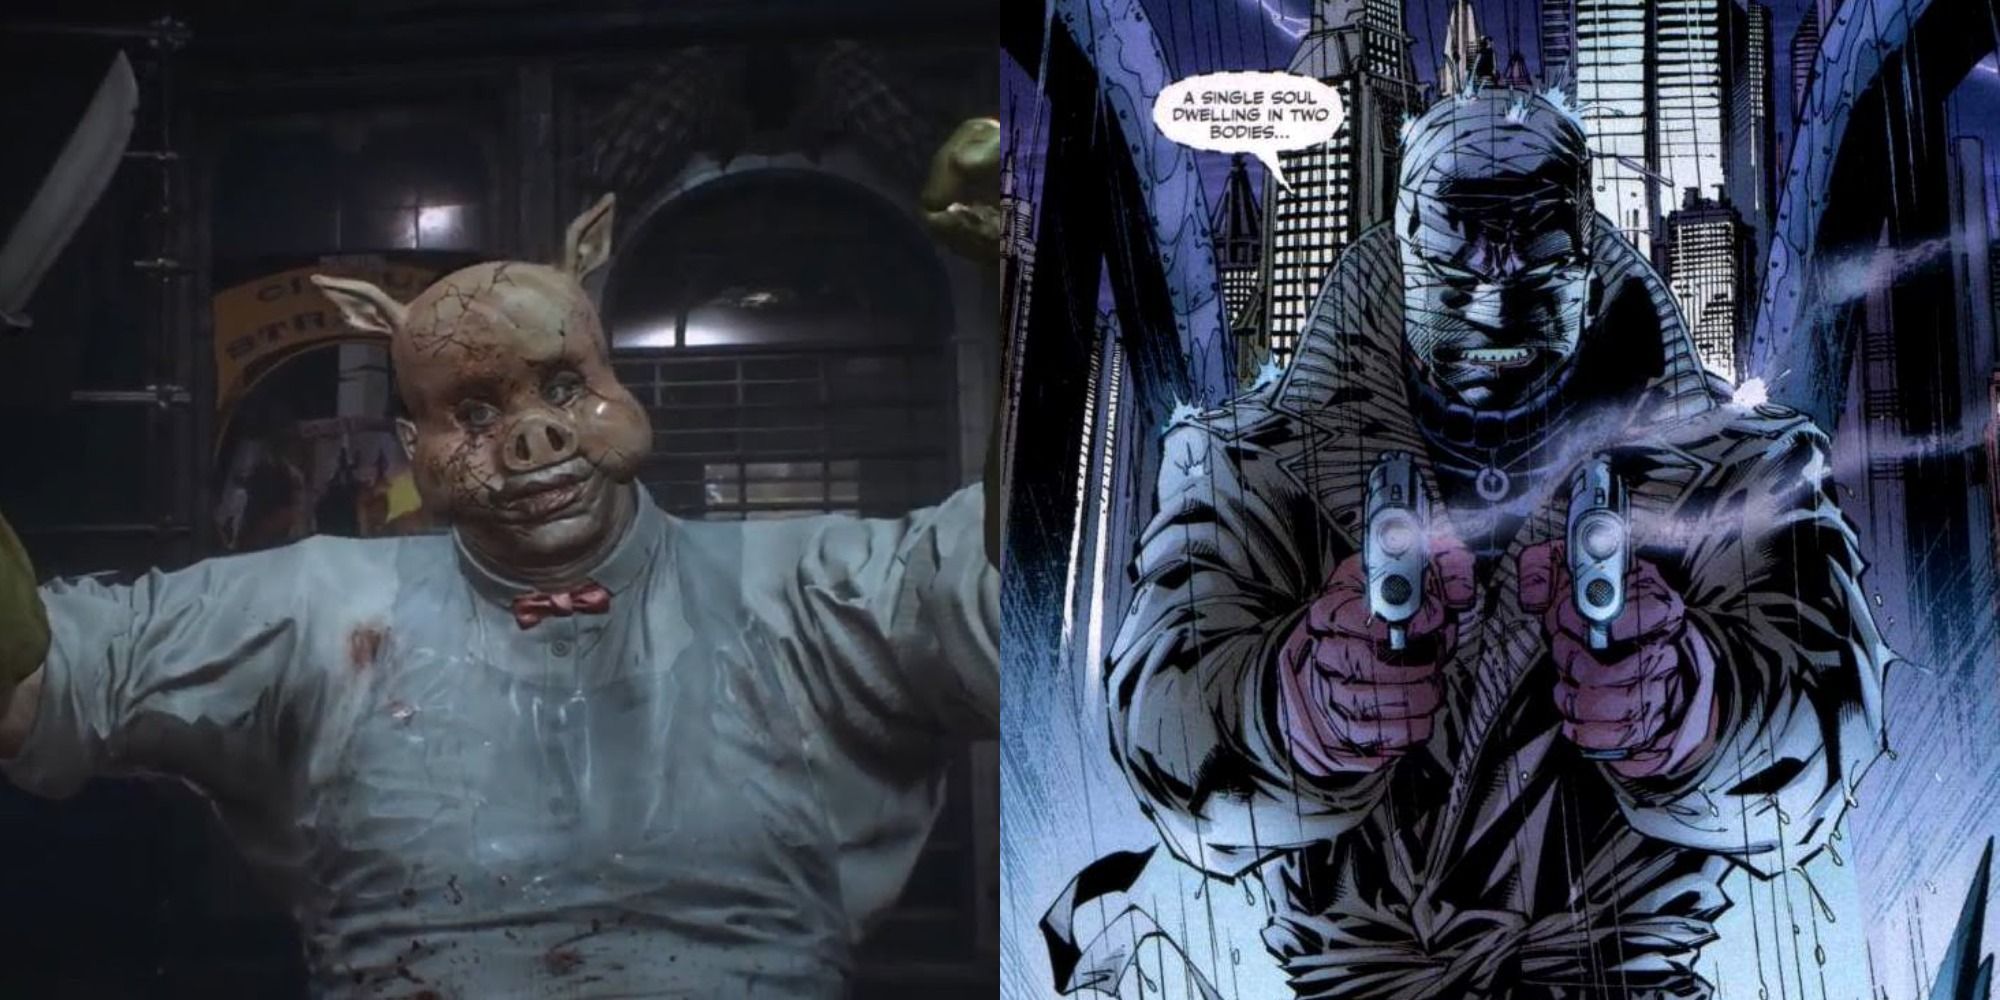 Two side by side images of Professor Pyg and Hush